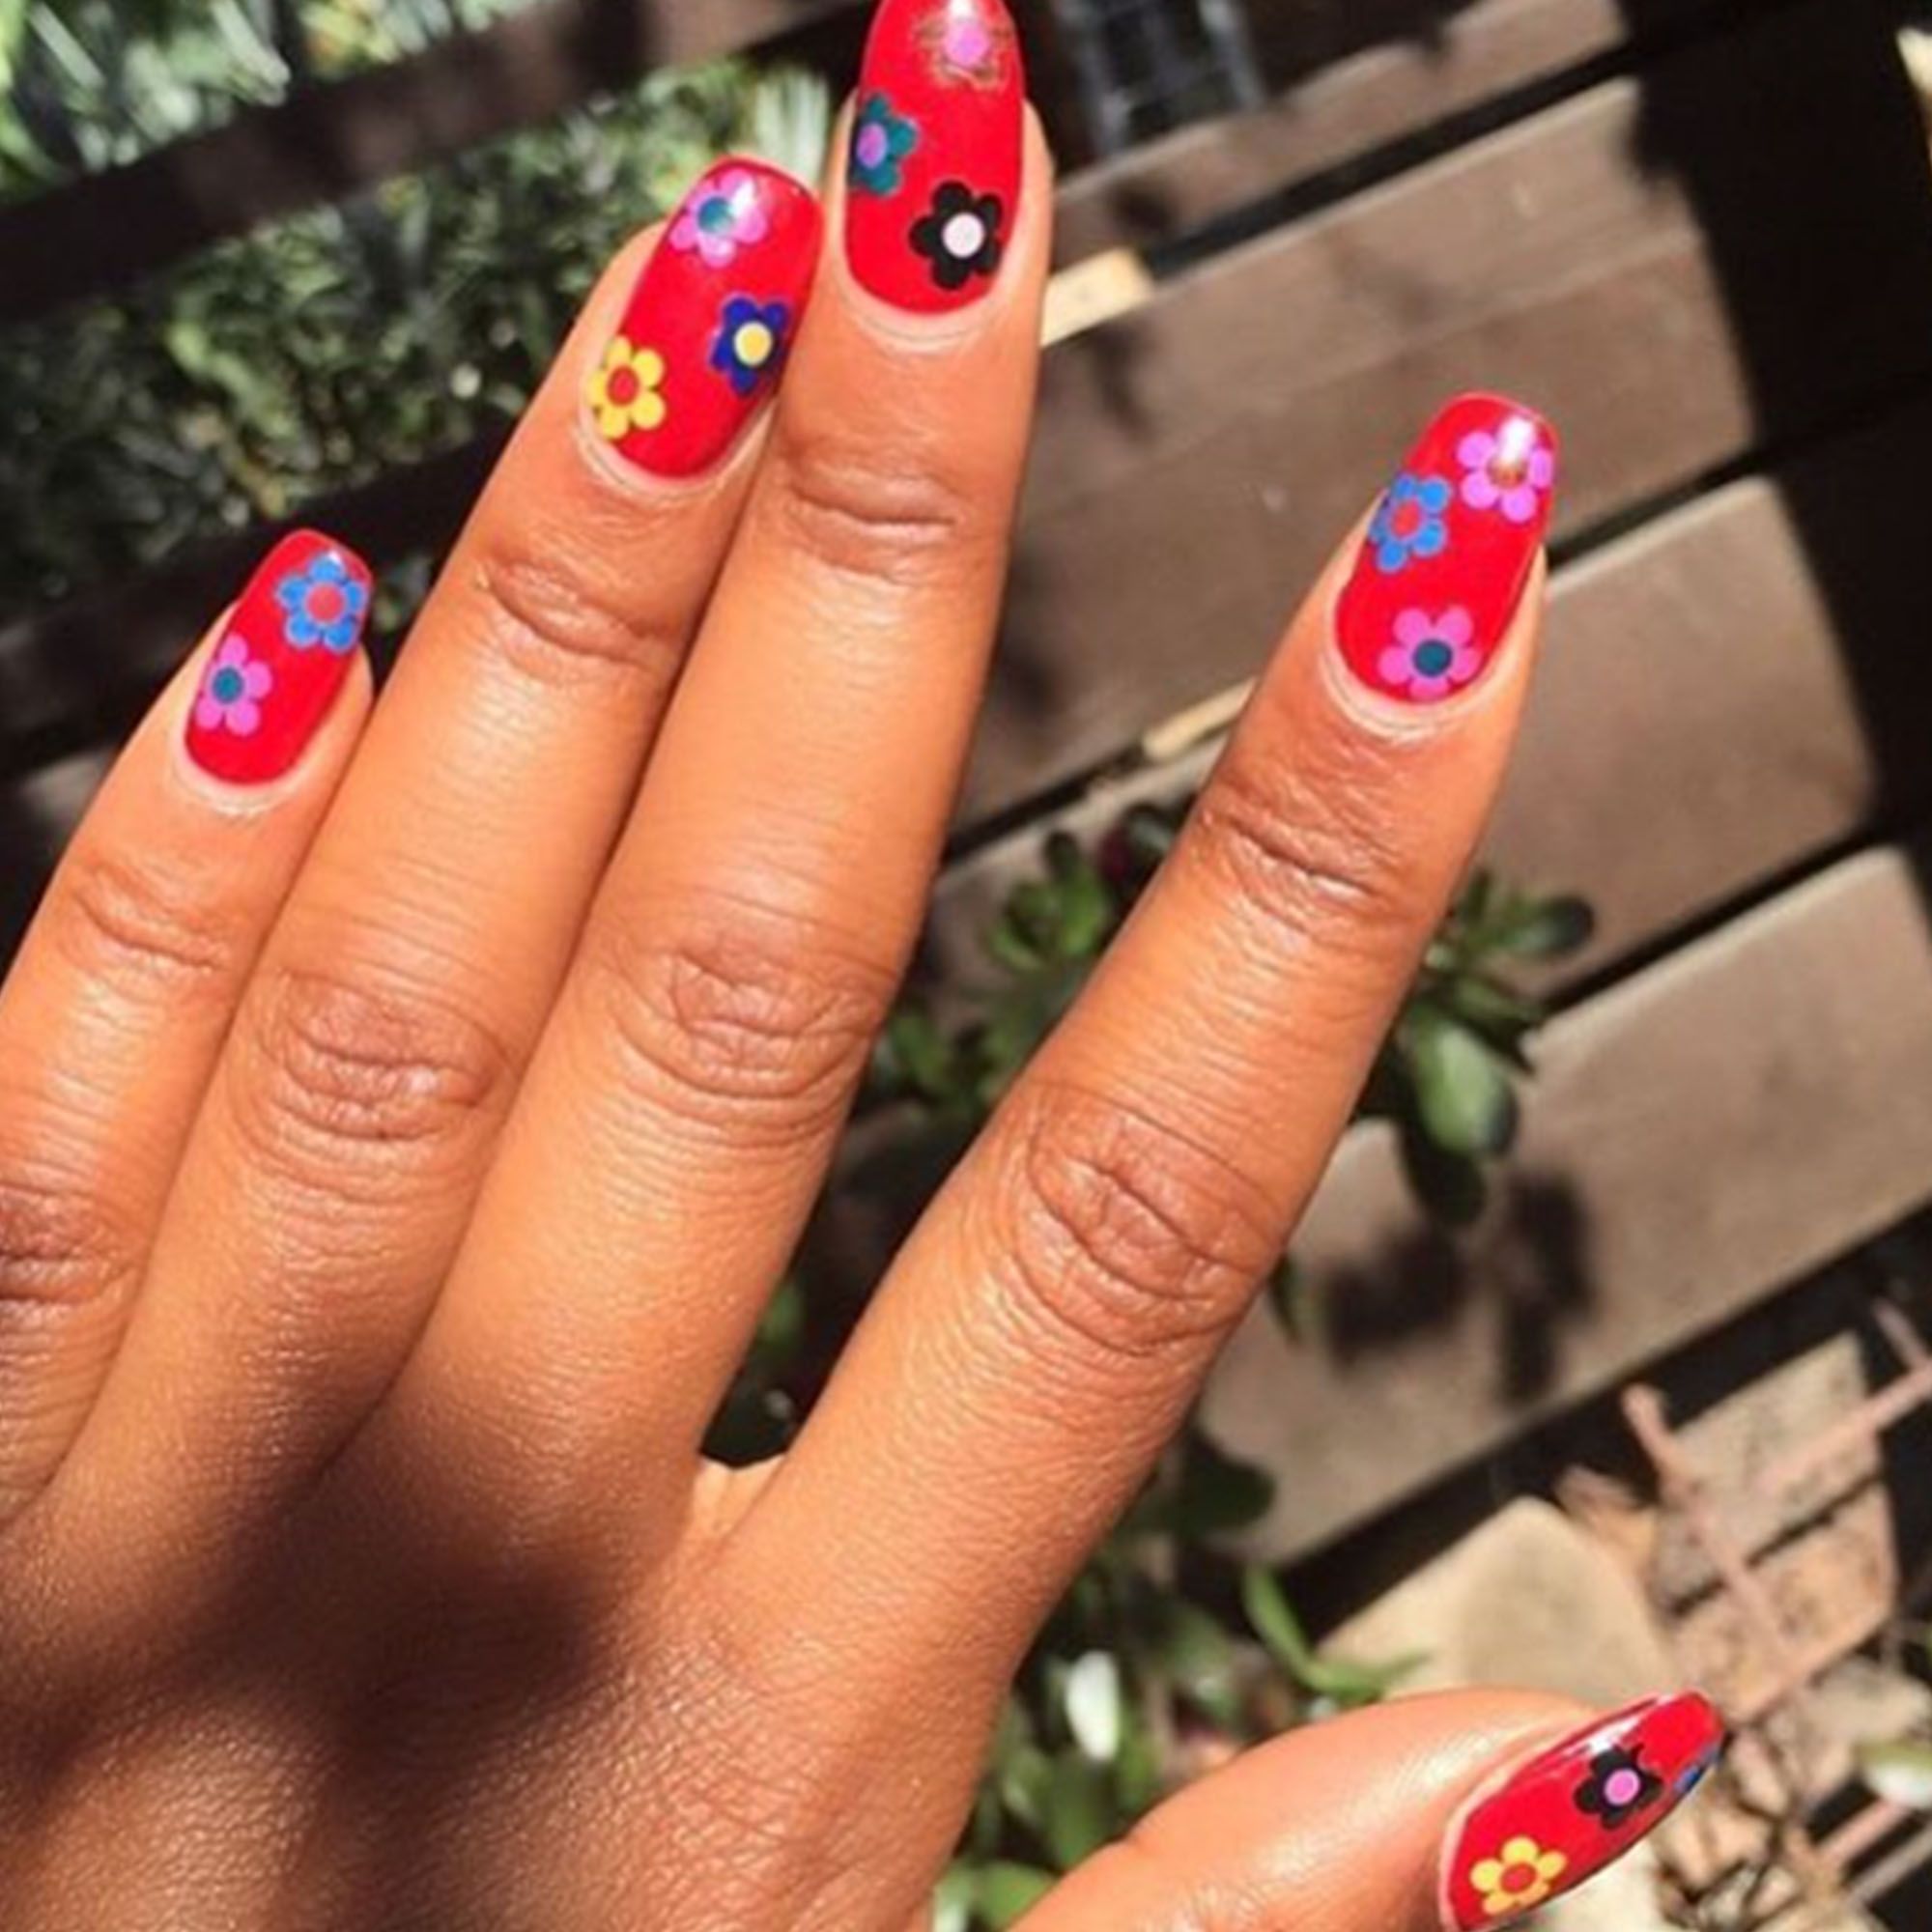 11 Fun Spring Floral Nail Designs The Best Flower Designs For Your Nails